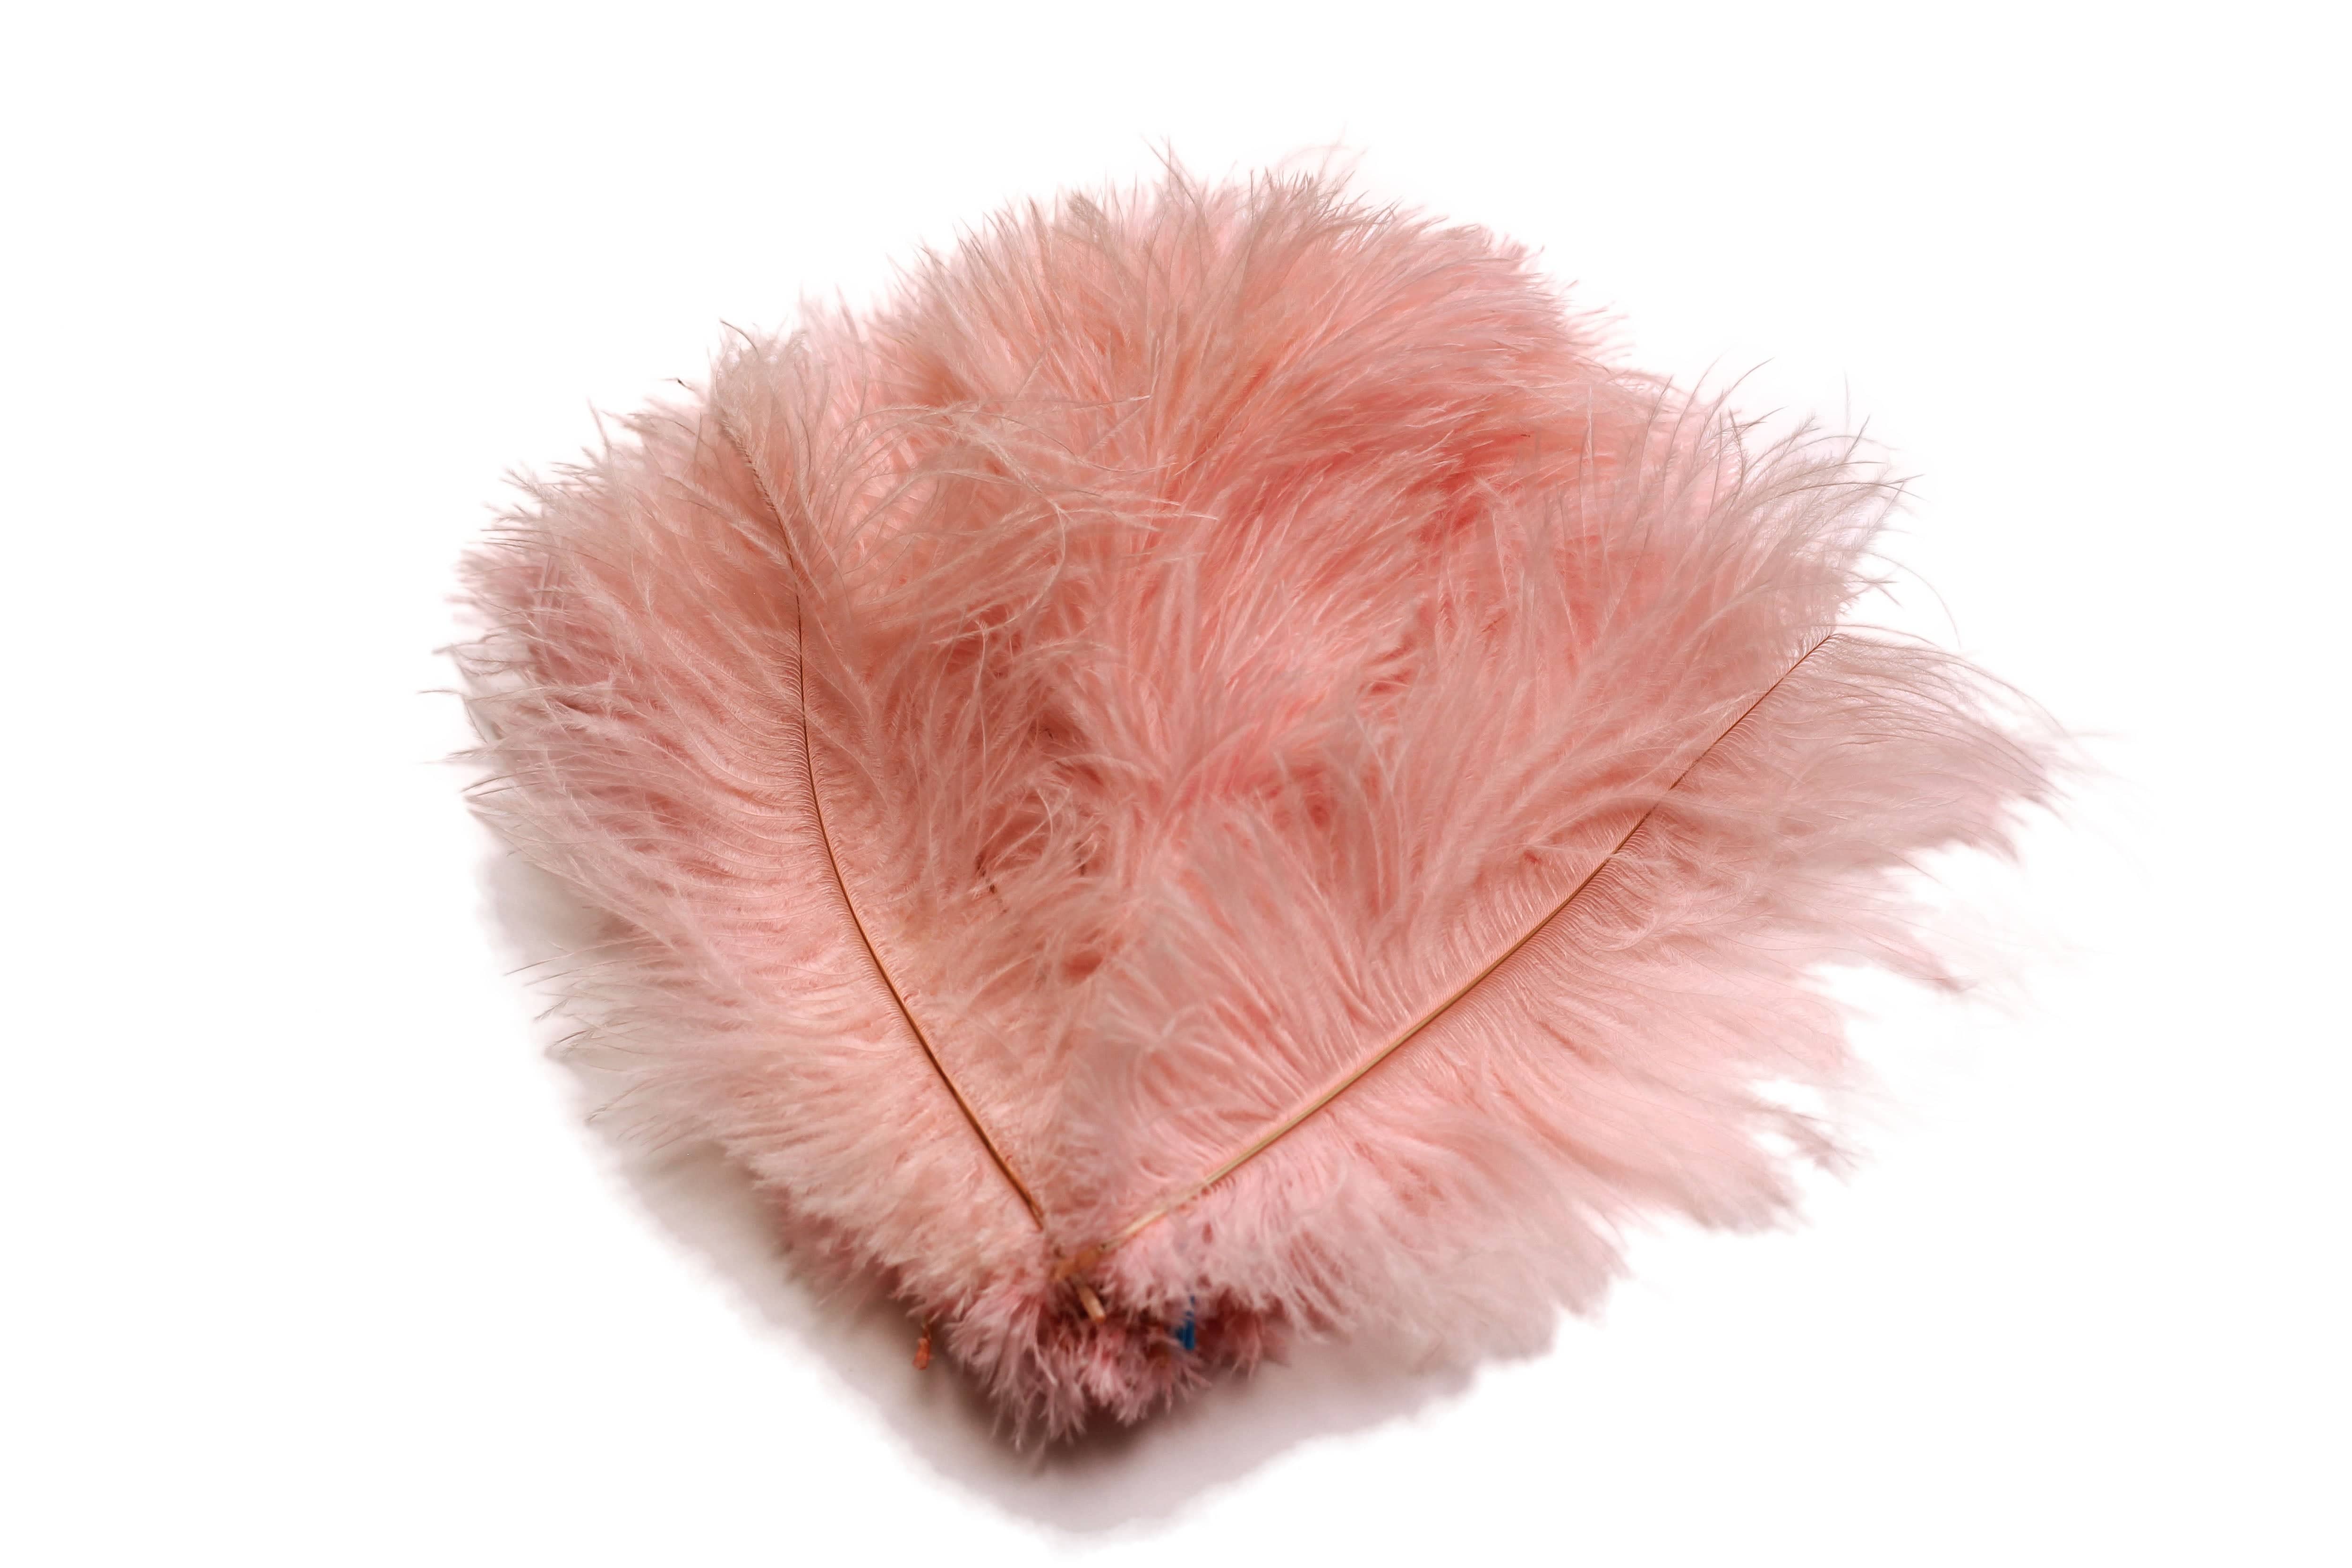 Blush Pink Ostrich Feathers Dyed Feather 15.7-17.7 inches Feathery Craft  for Home Wedding Event D¨¦cor Pack of 10